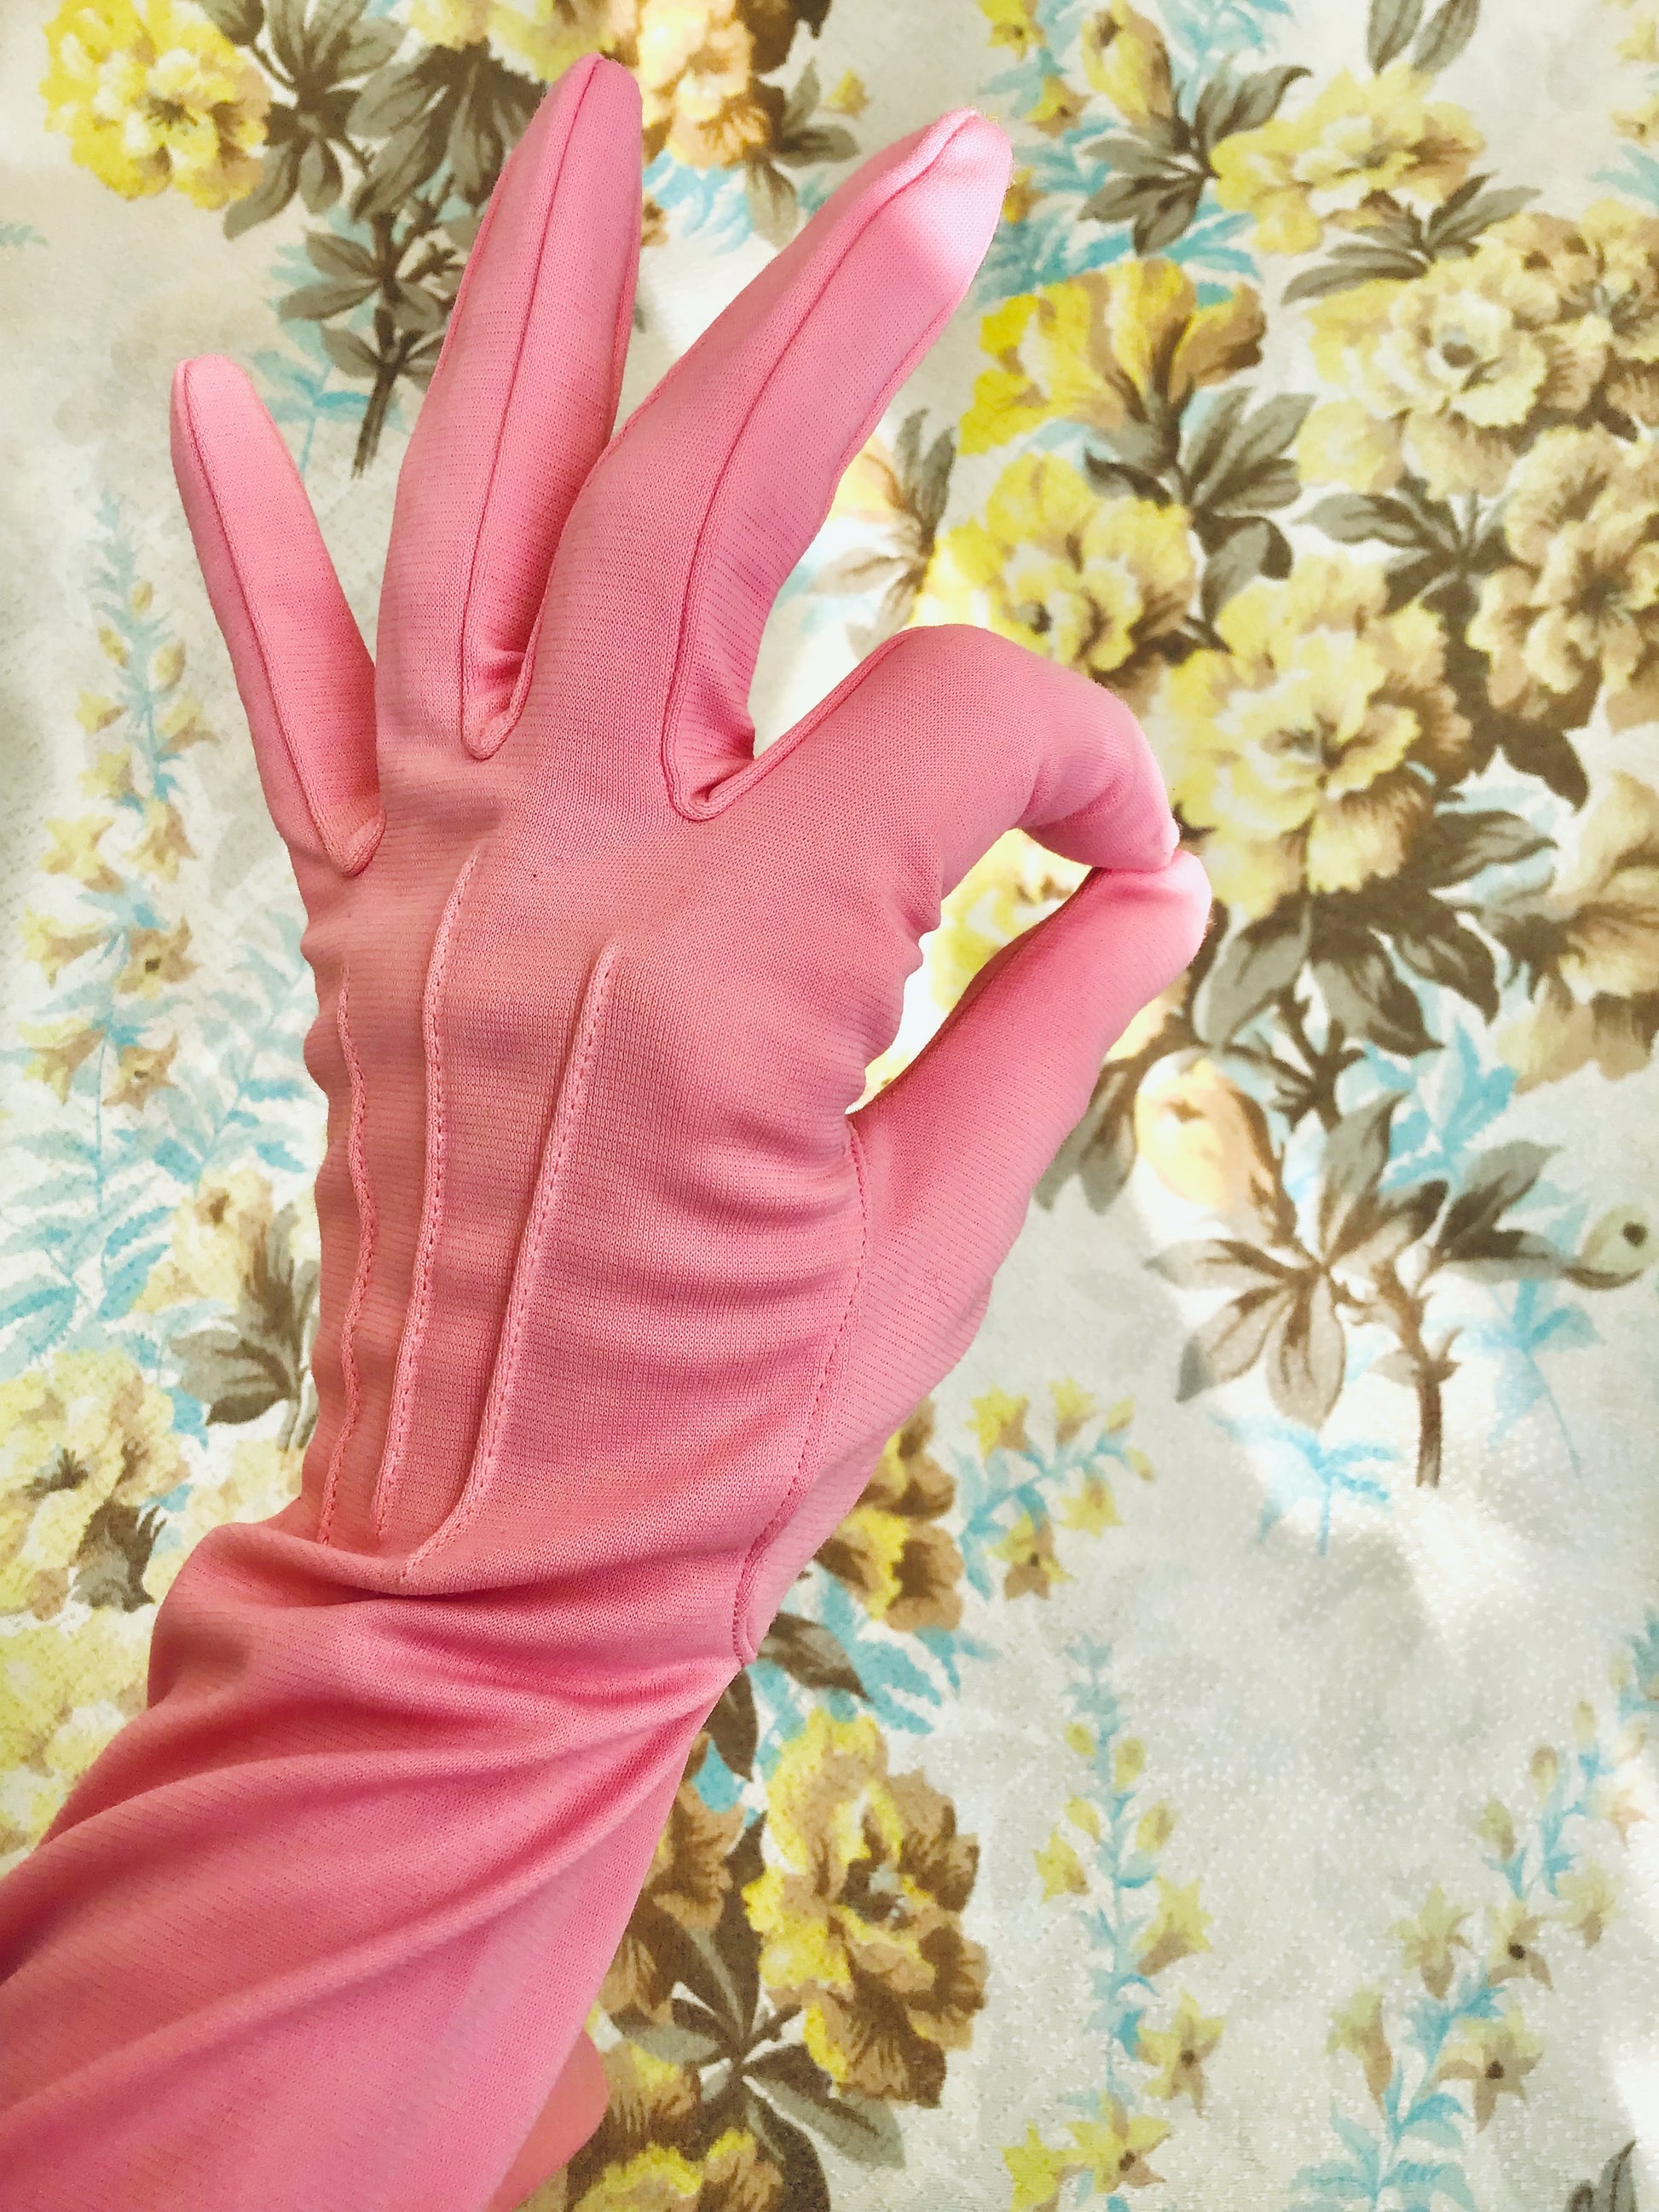 Buy Candy pink vintage cocktail party gloves